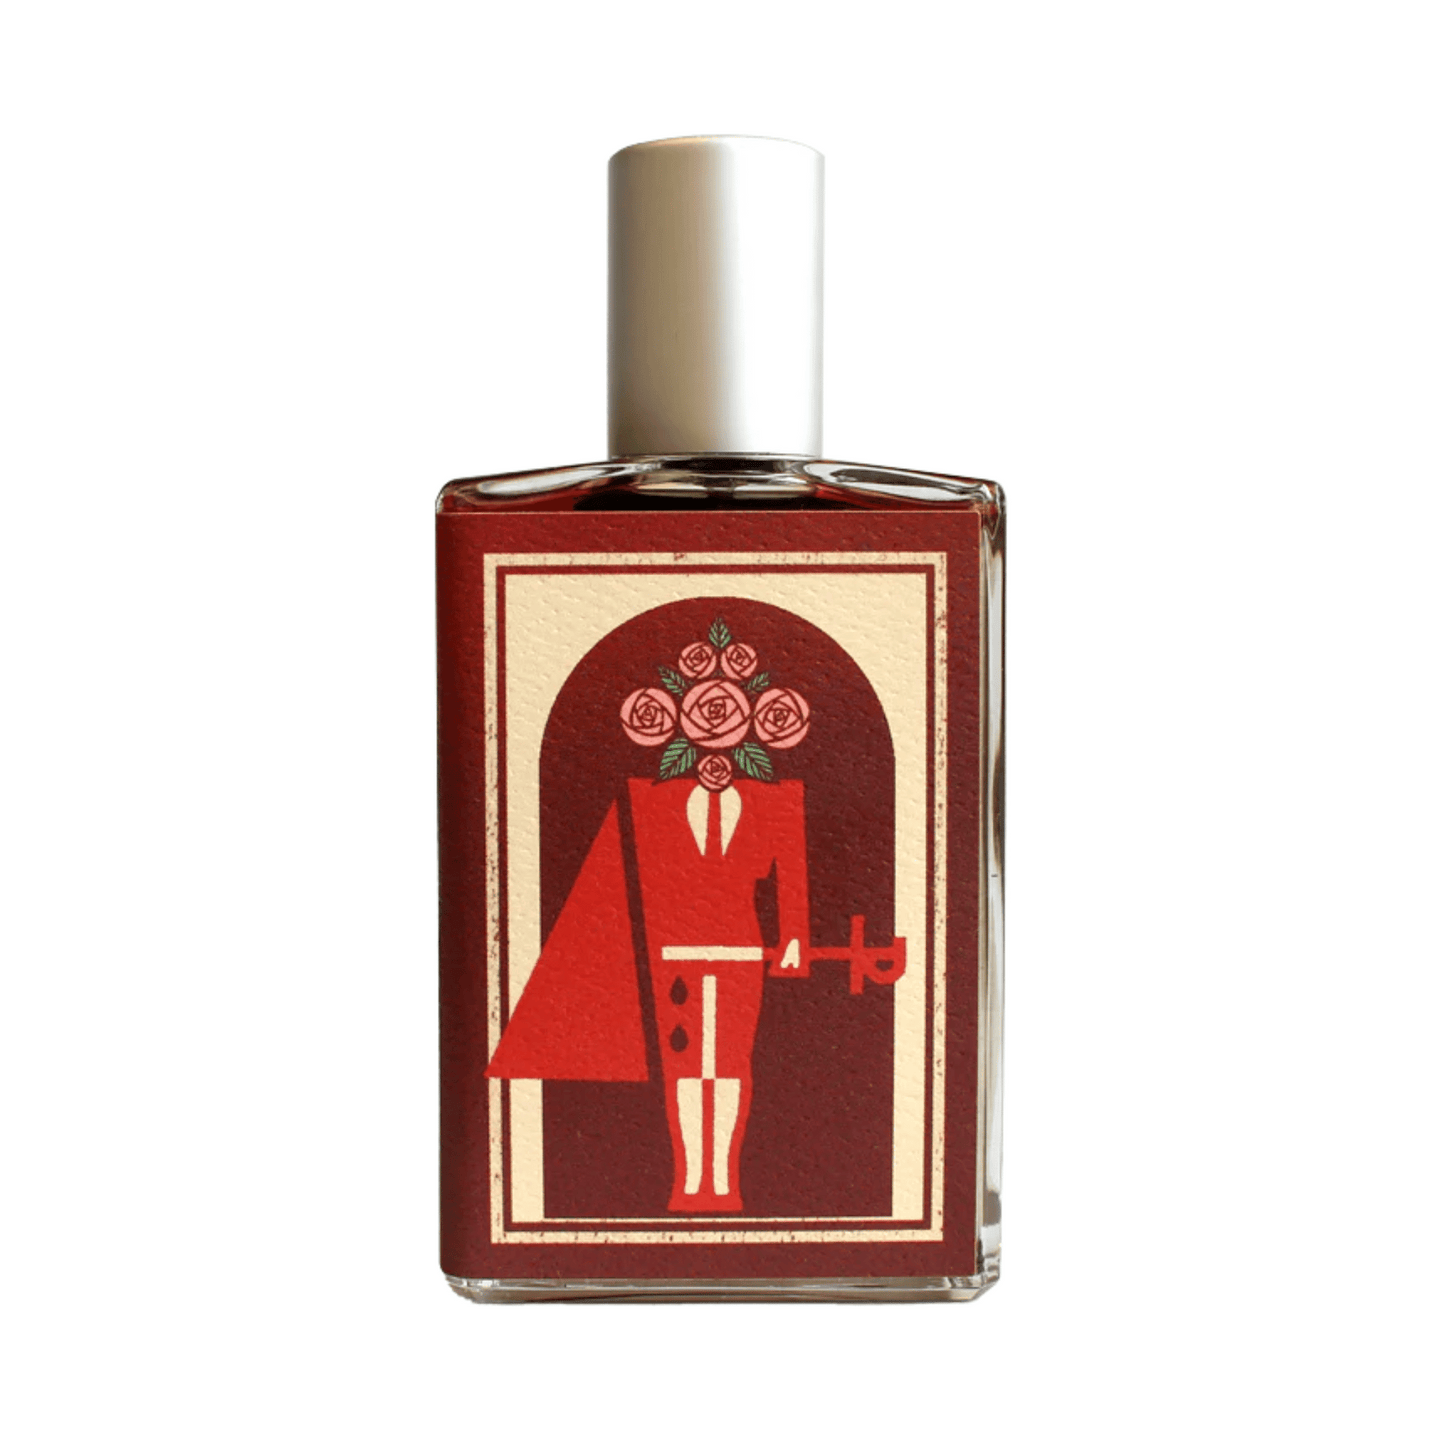 Primary Image of Bull's Blood EDP (2nd Edition)